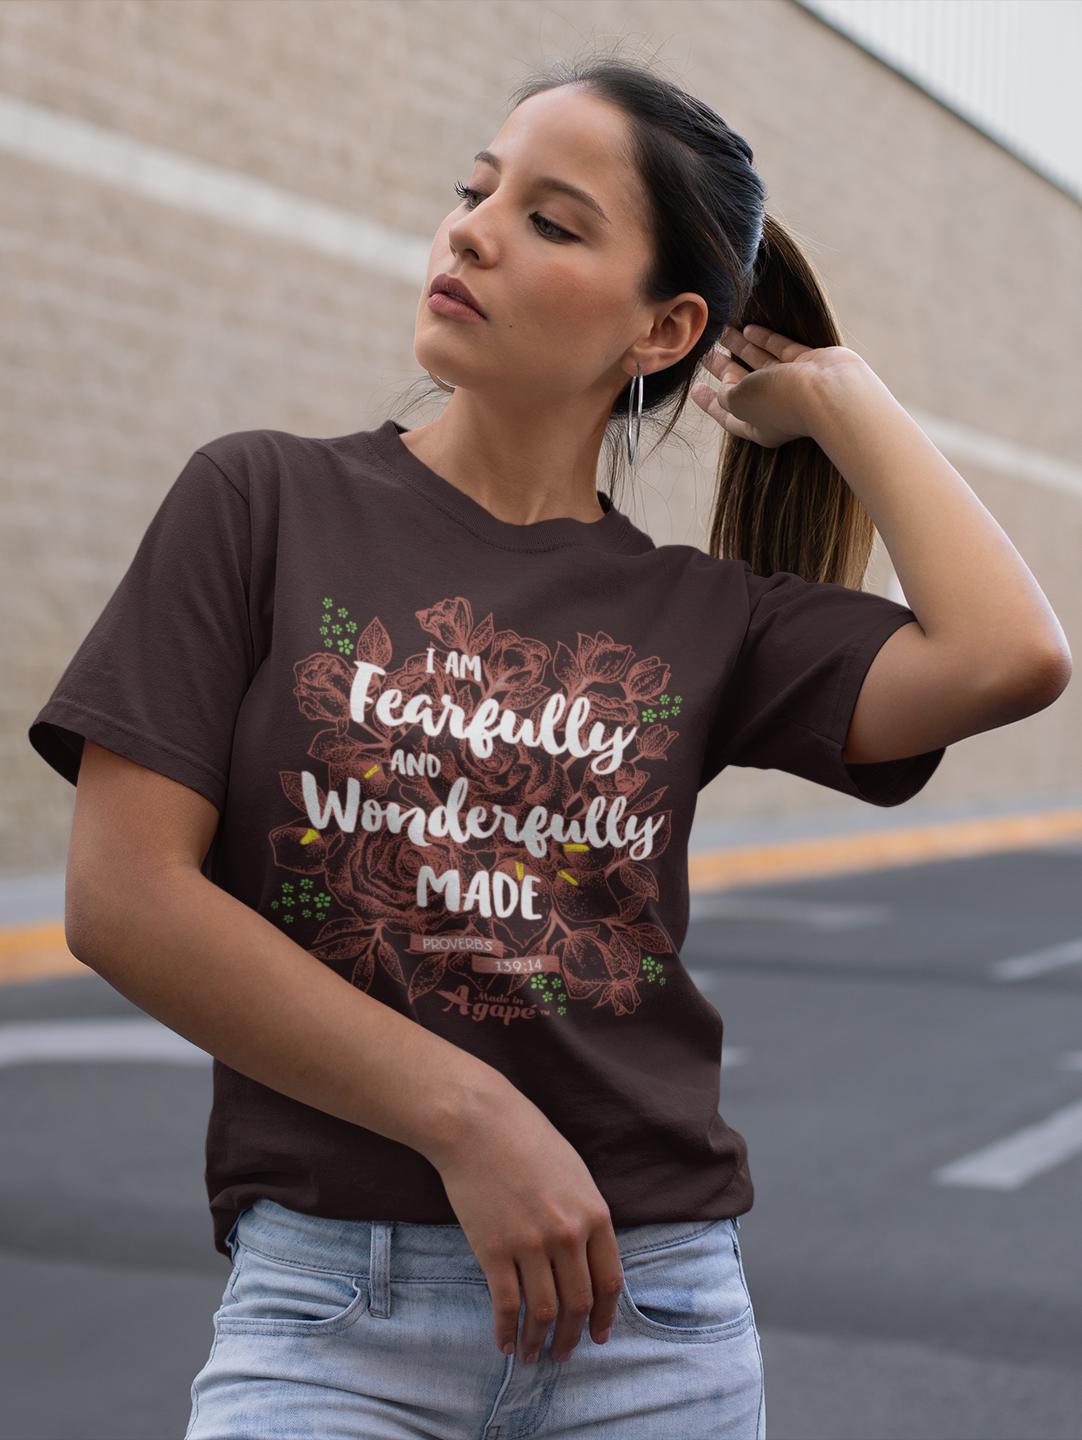 Shop Women's Relaxed Fit Shirts and Clothing